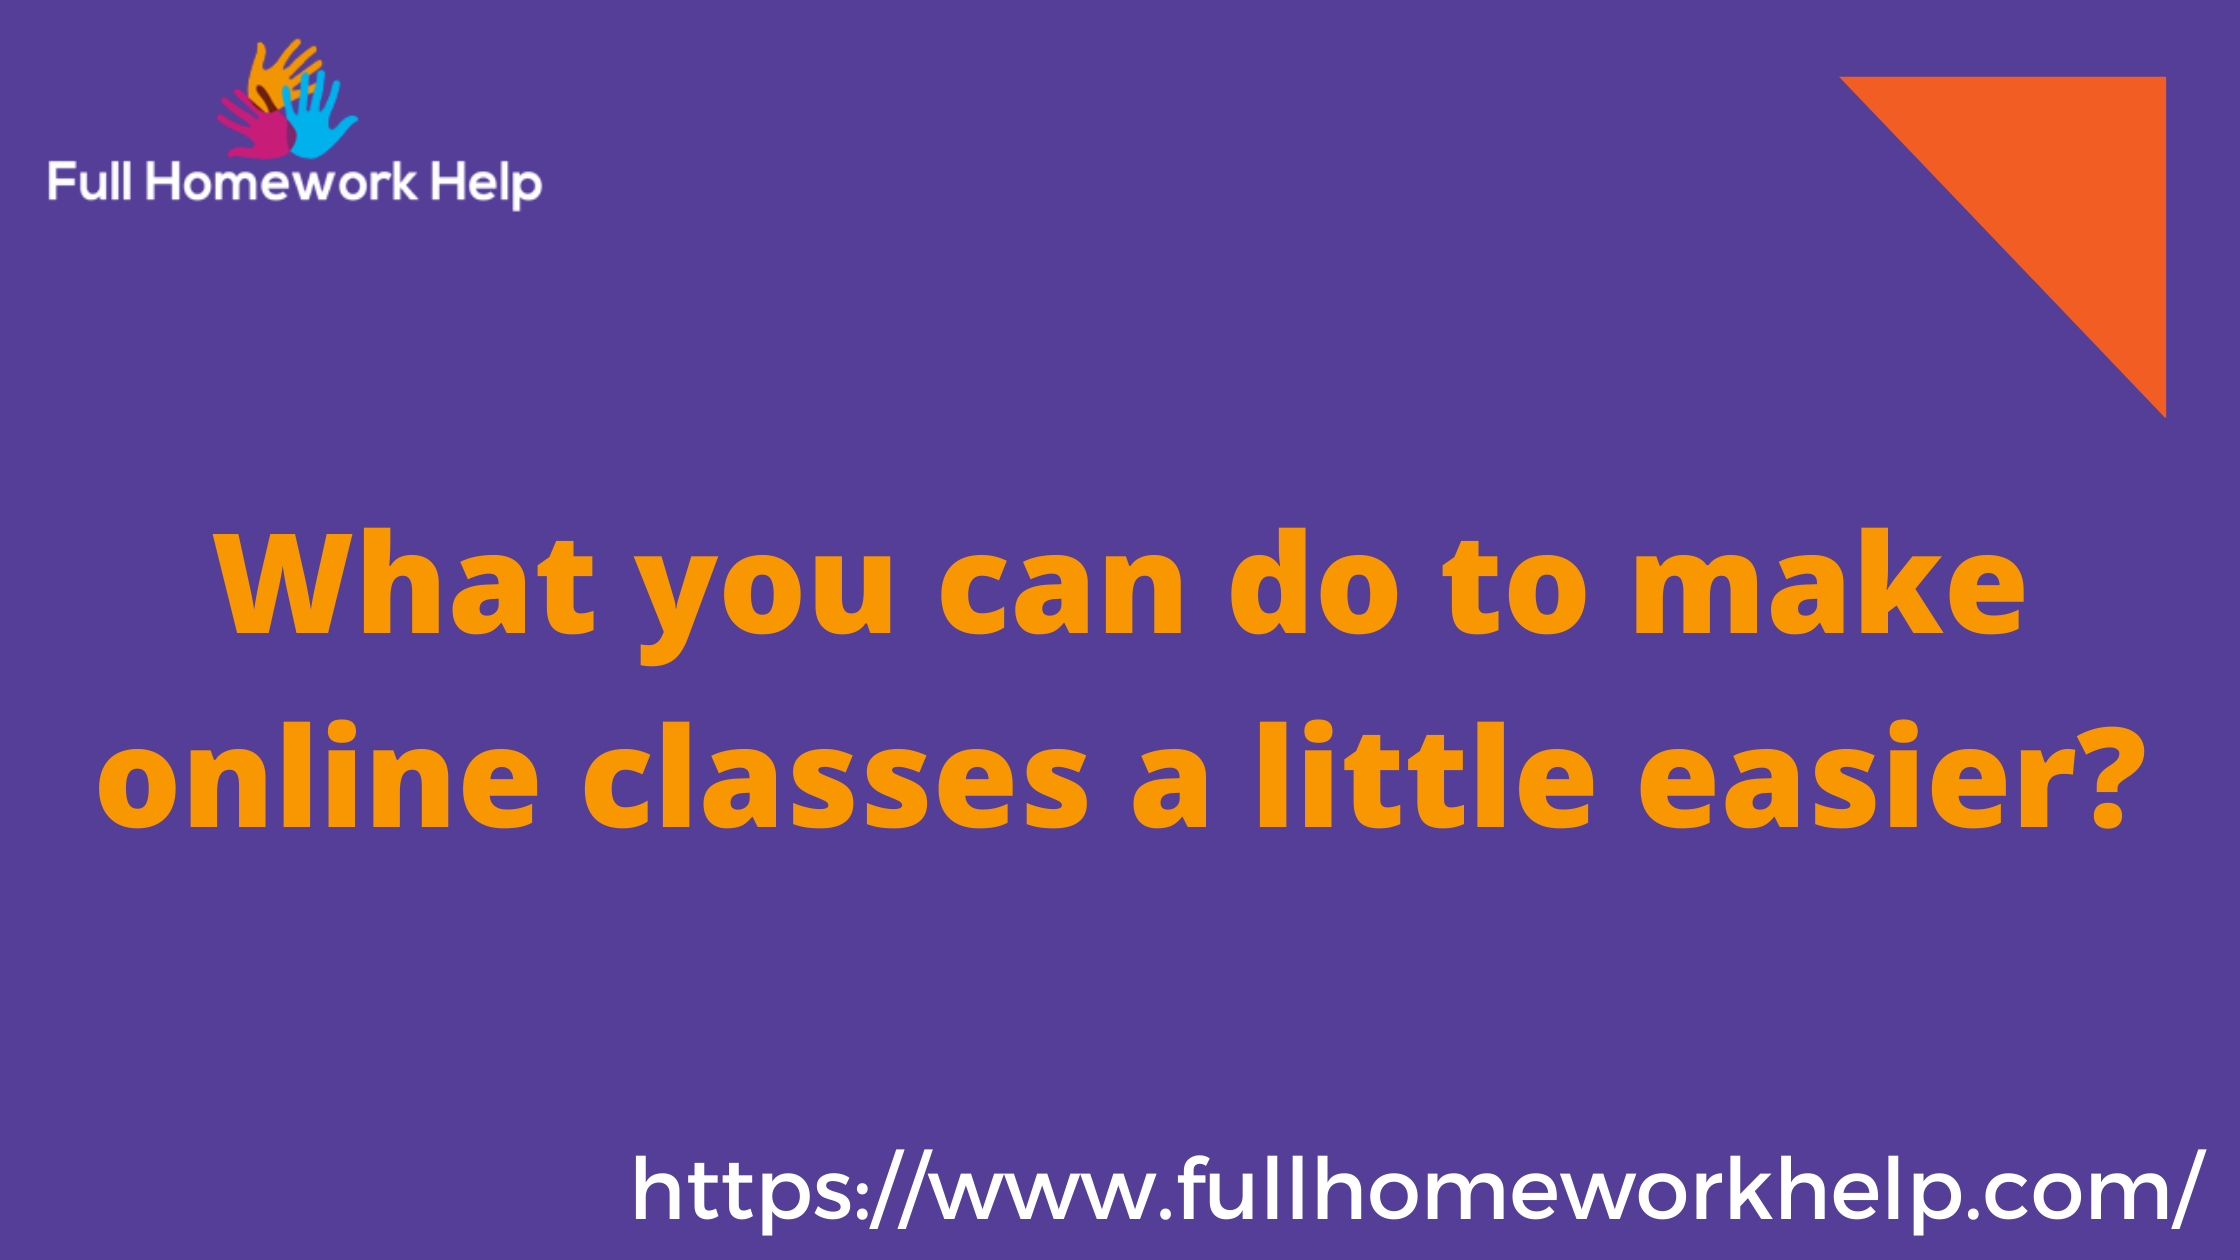 What you can do to make online classes a little easier?